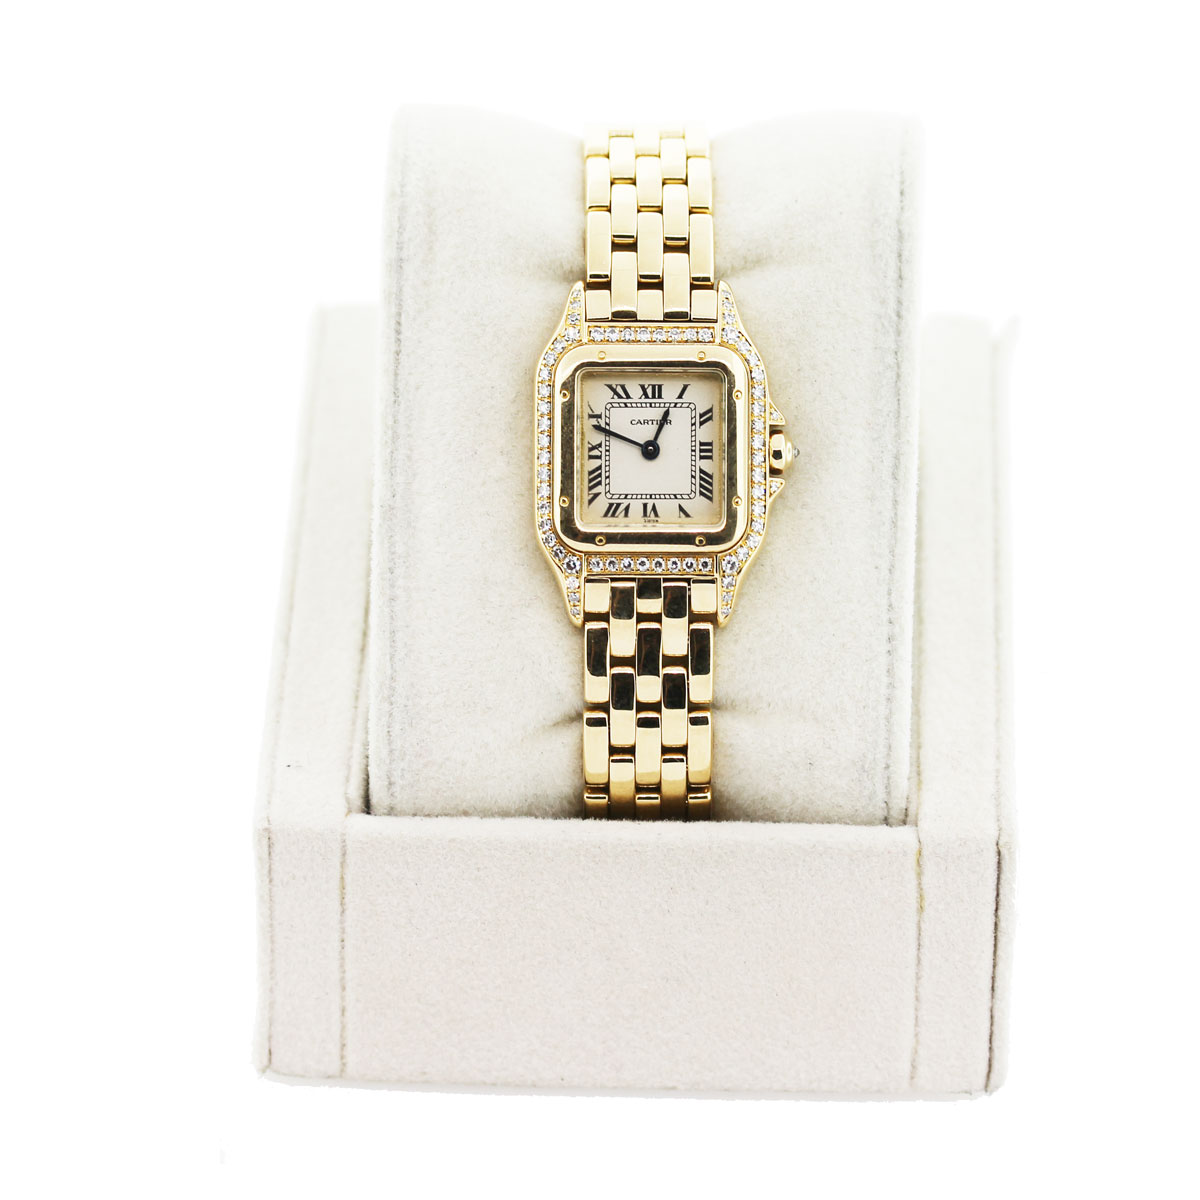 Preowned Cartier Watches and Jewelry - Designer Spotlight